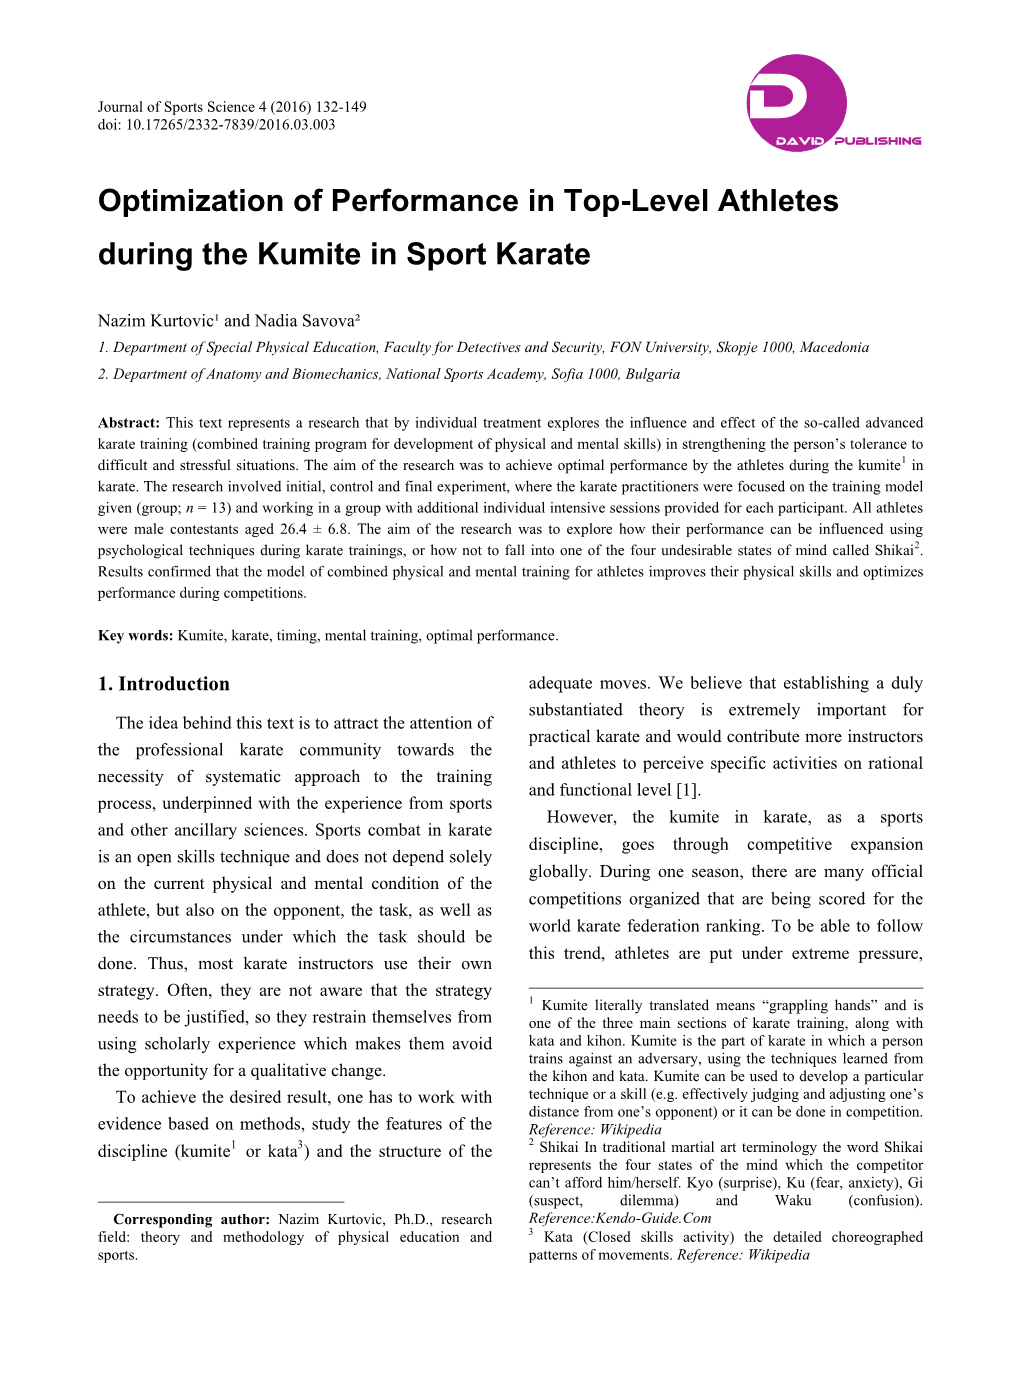 Optimization of Performance in Top-Level Athletes During the Kumite in Sport Karate